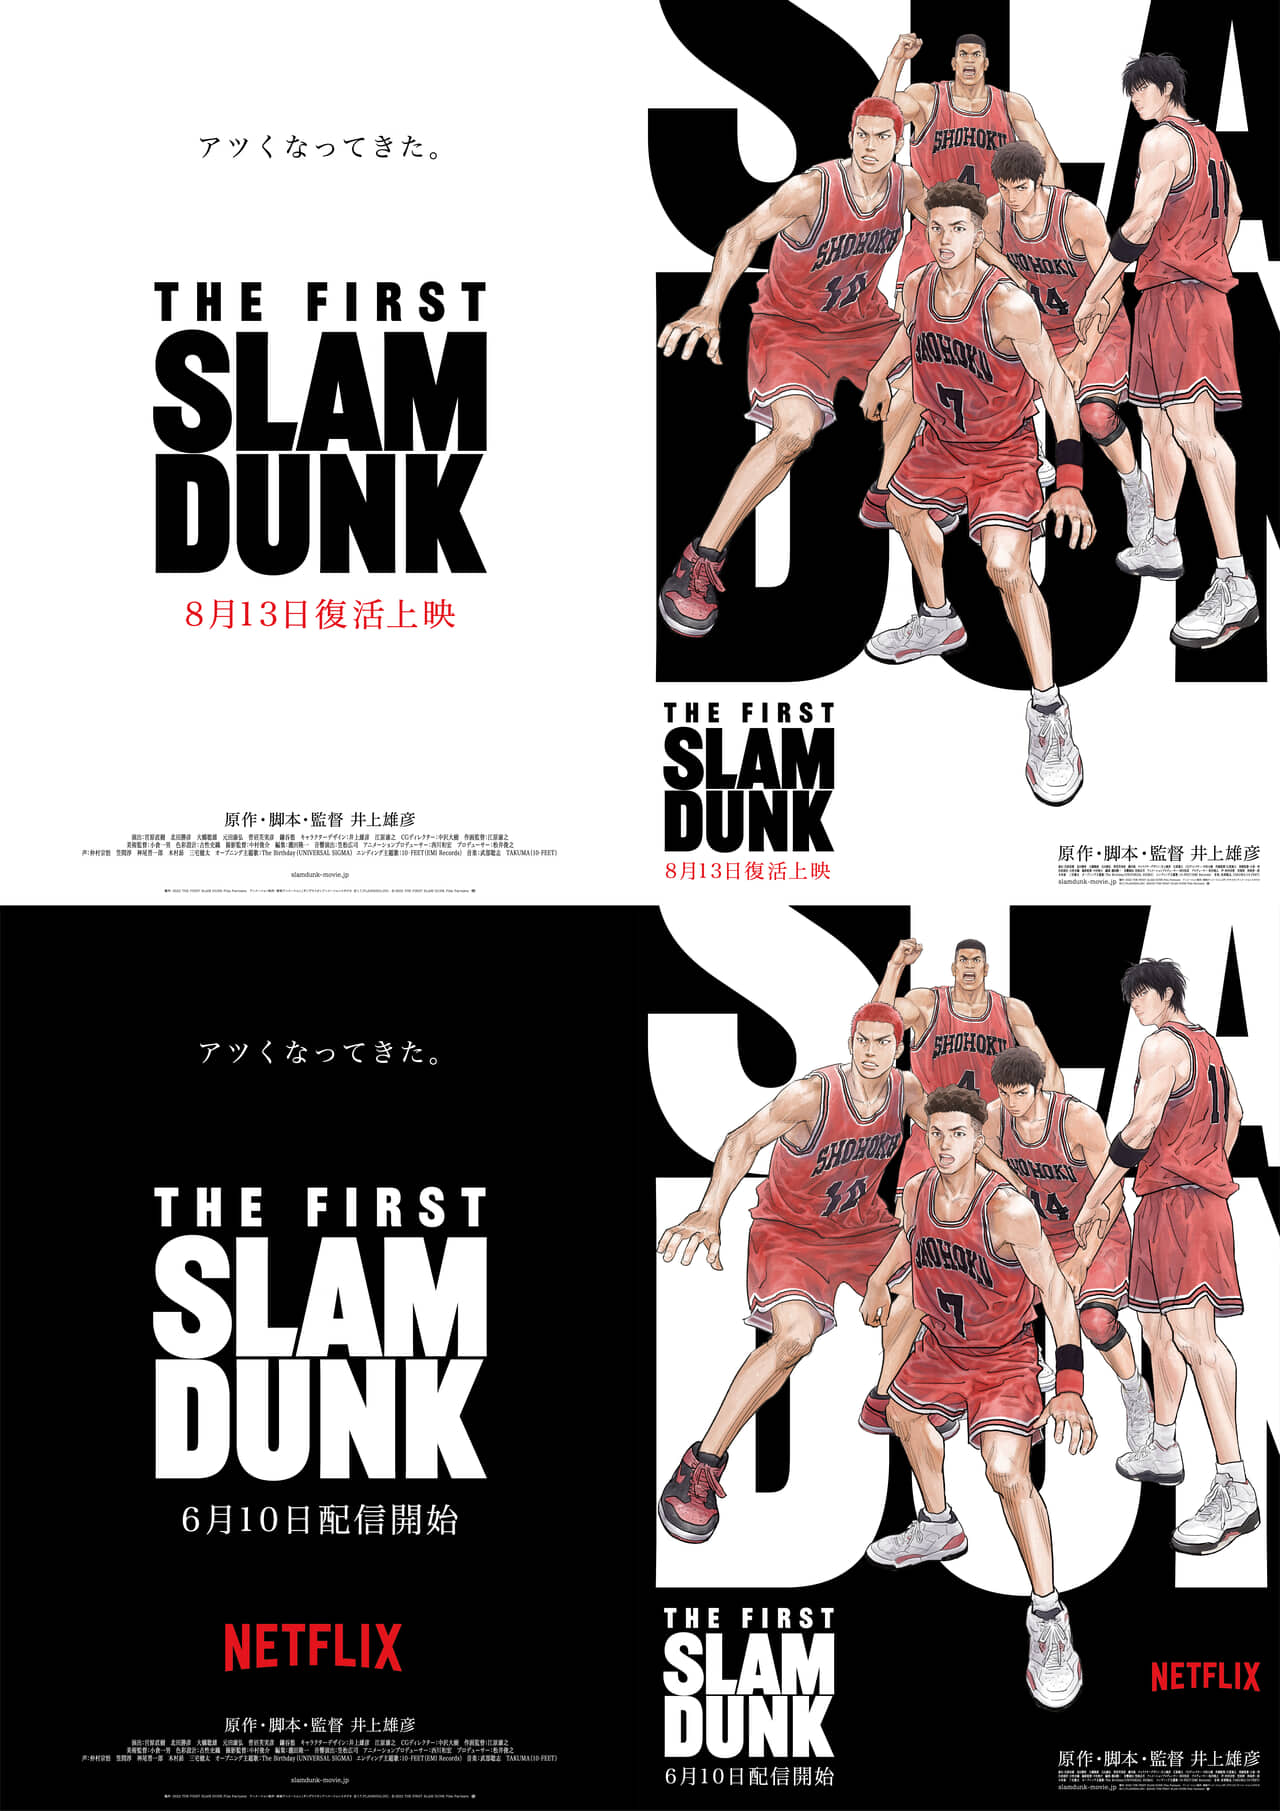 (c) I.T.PLANNING,INC. (c) 2022 THE FIRST SLAM DUNK Film Partners